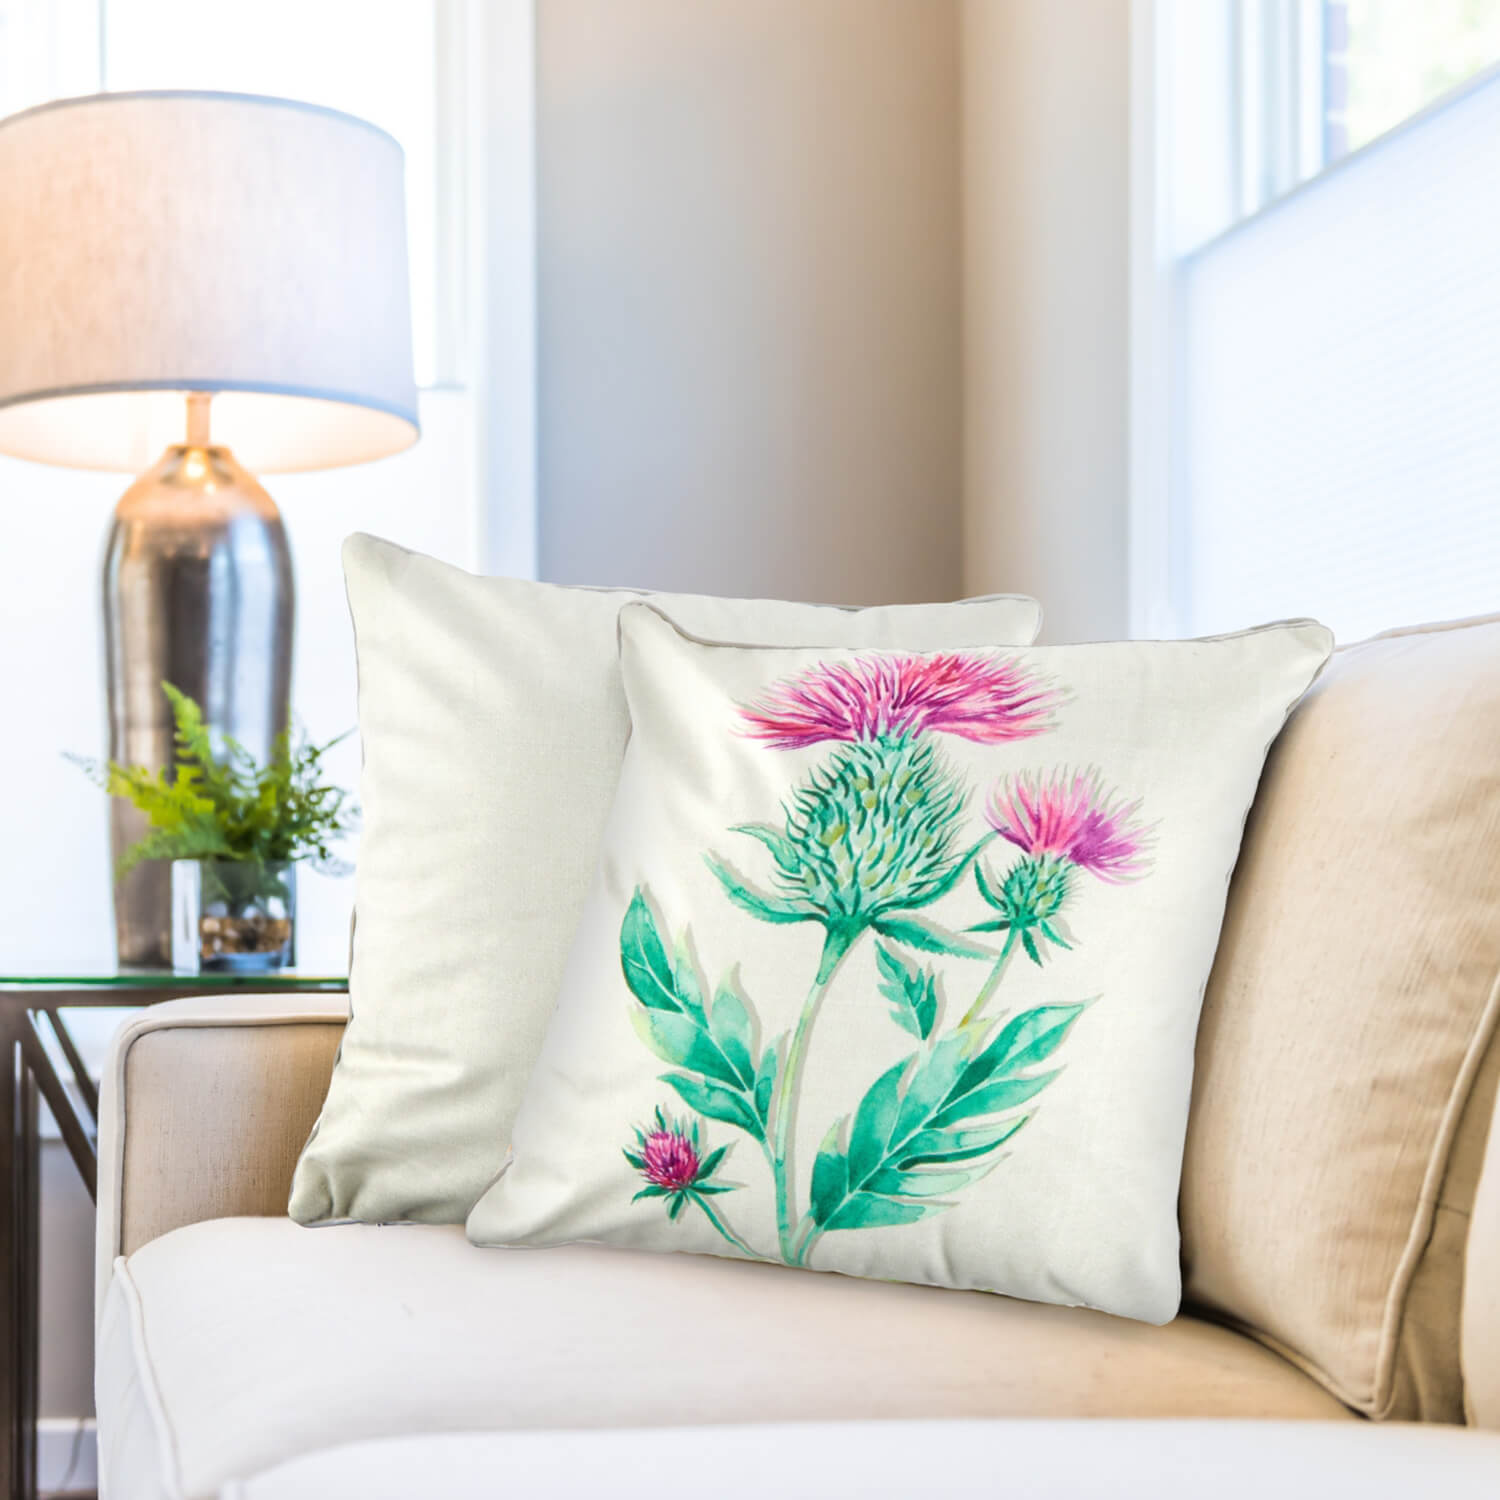 The Home Collection Watercolour Animals Velvet Cushion 17&quot; x 17&quot; - Thistle Print 1 Shaws Department Stores